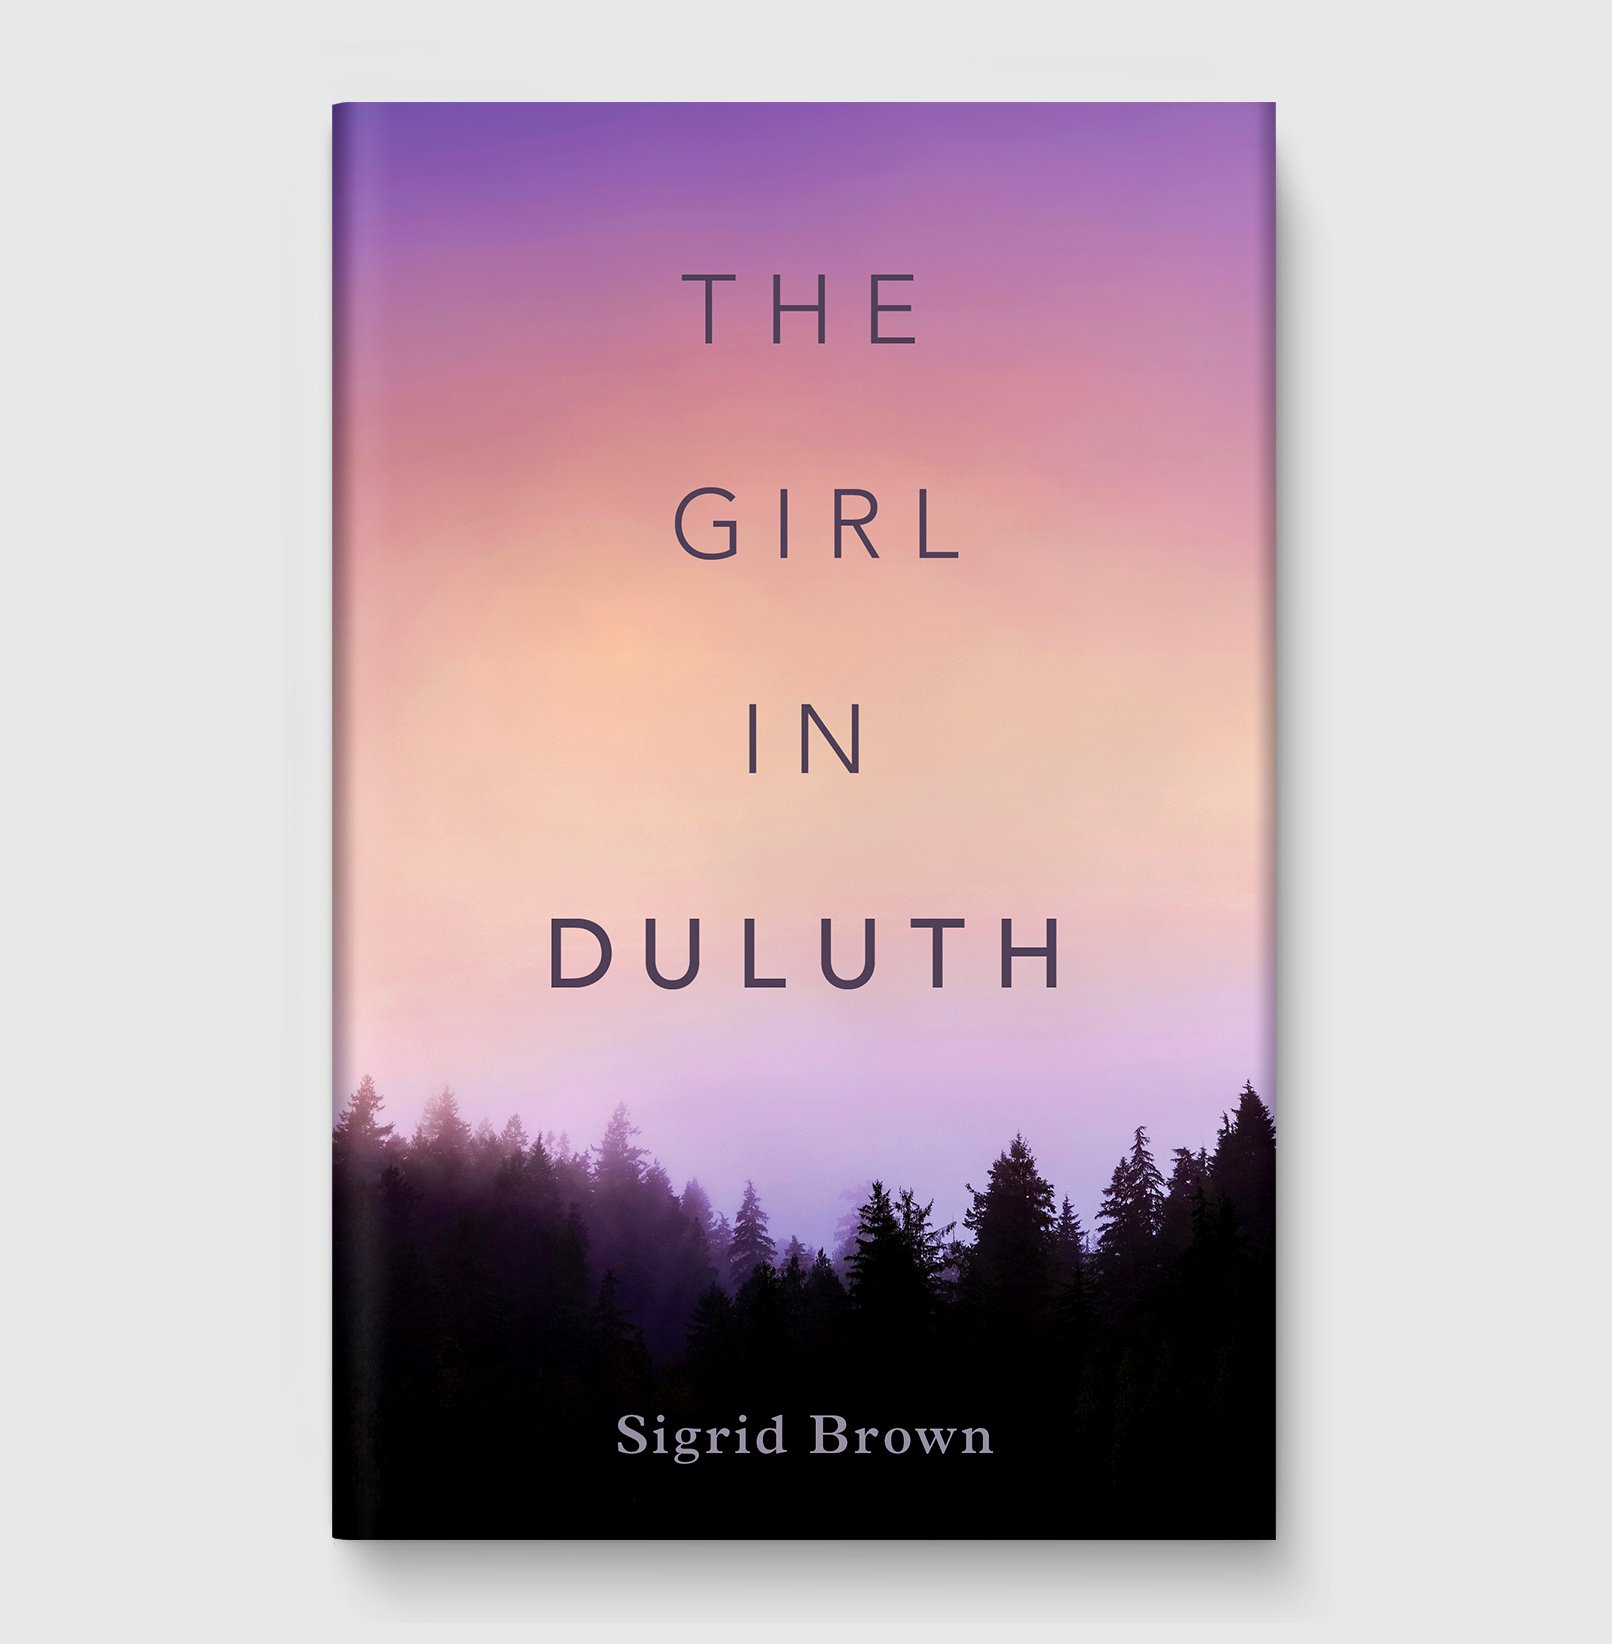 The Girl in Duluth